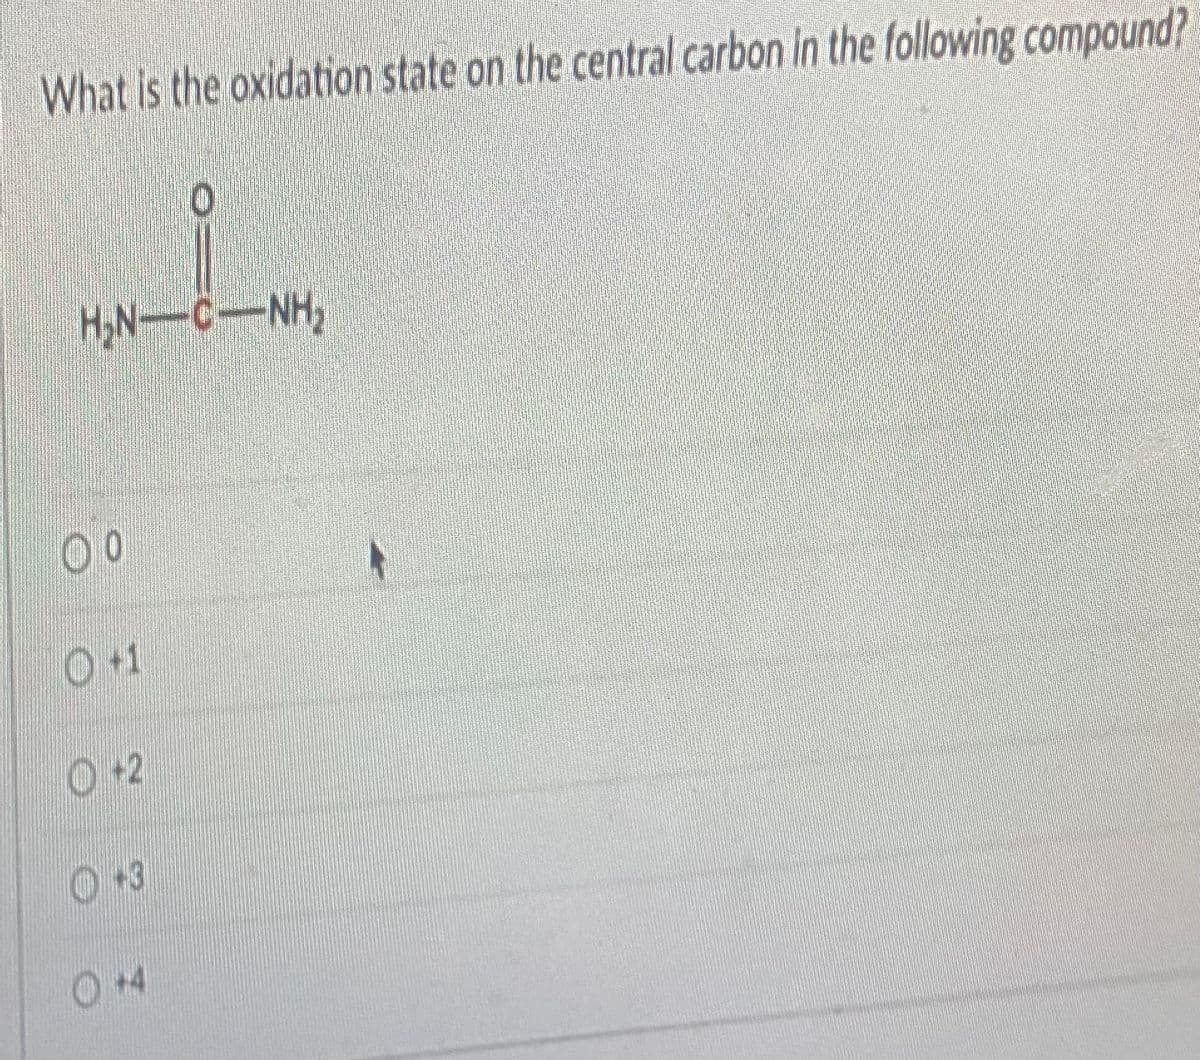 What is the oxidation state on the central carbon in the following compound?
0
HN-CNH
00
0+1
0+2
+3
+4